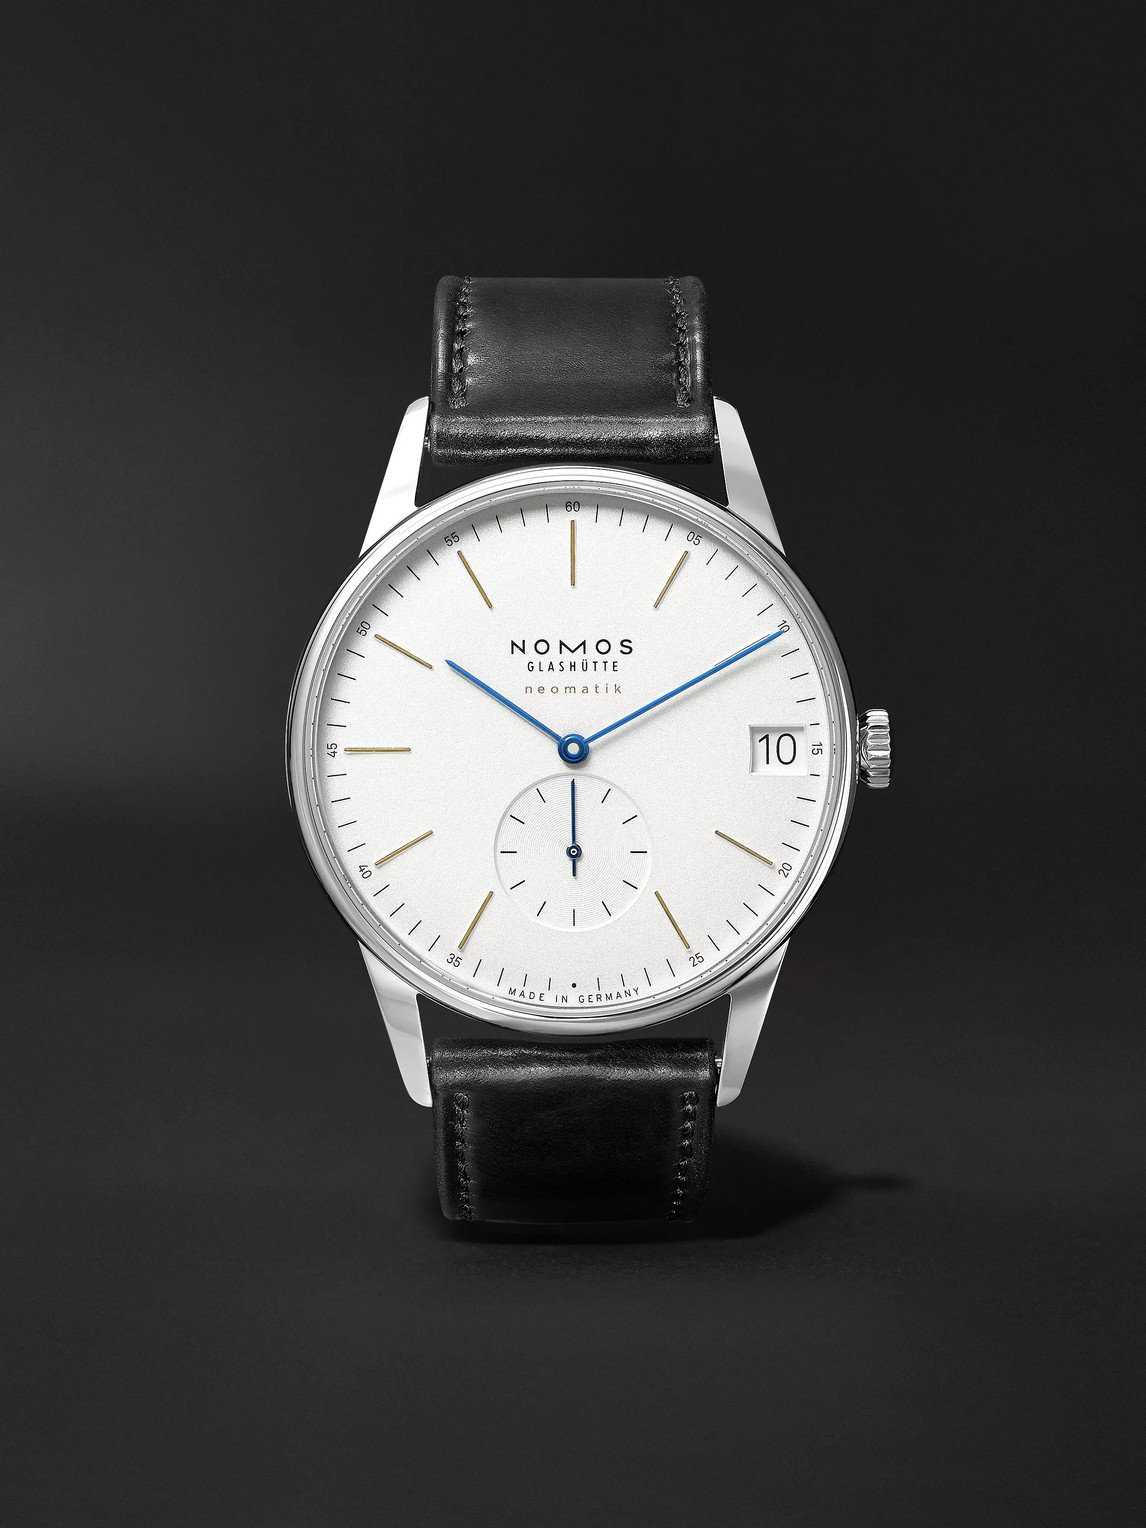 Nomos Glashütte Orion Neomatik Automatic 41mm Stainless Steel And Leather Watch, Ref. No. 360 In White